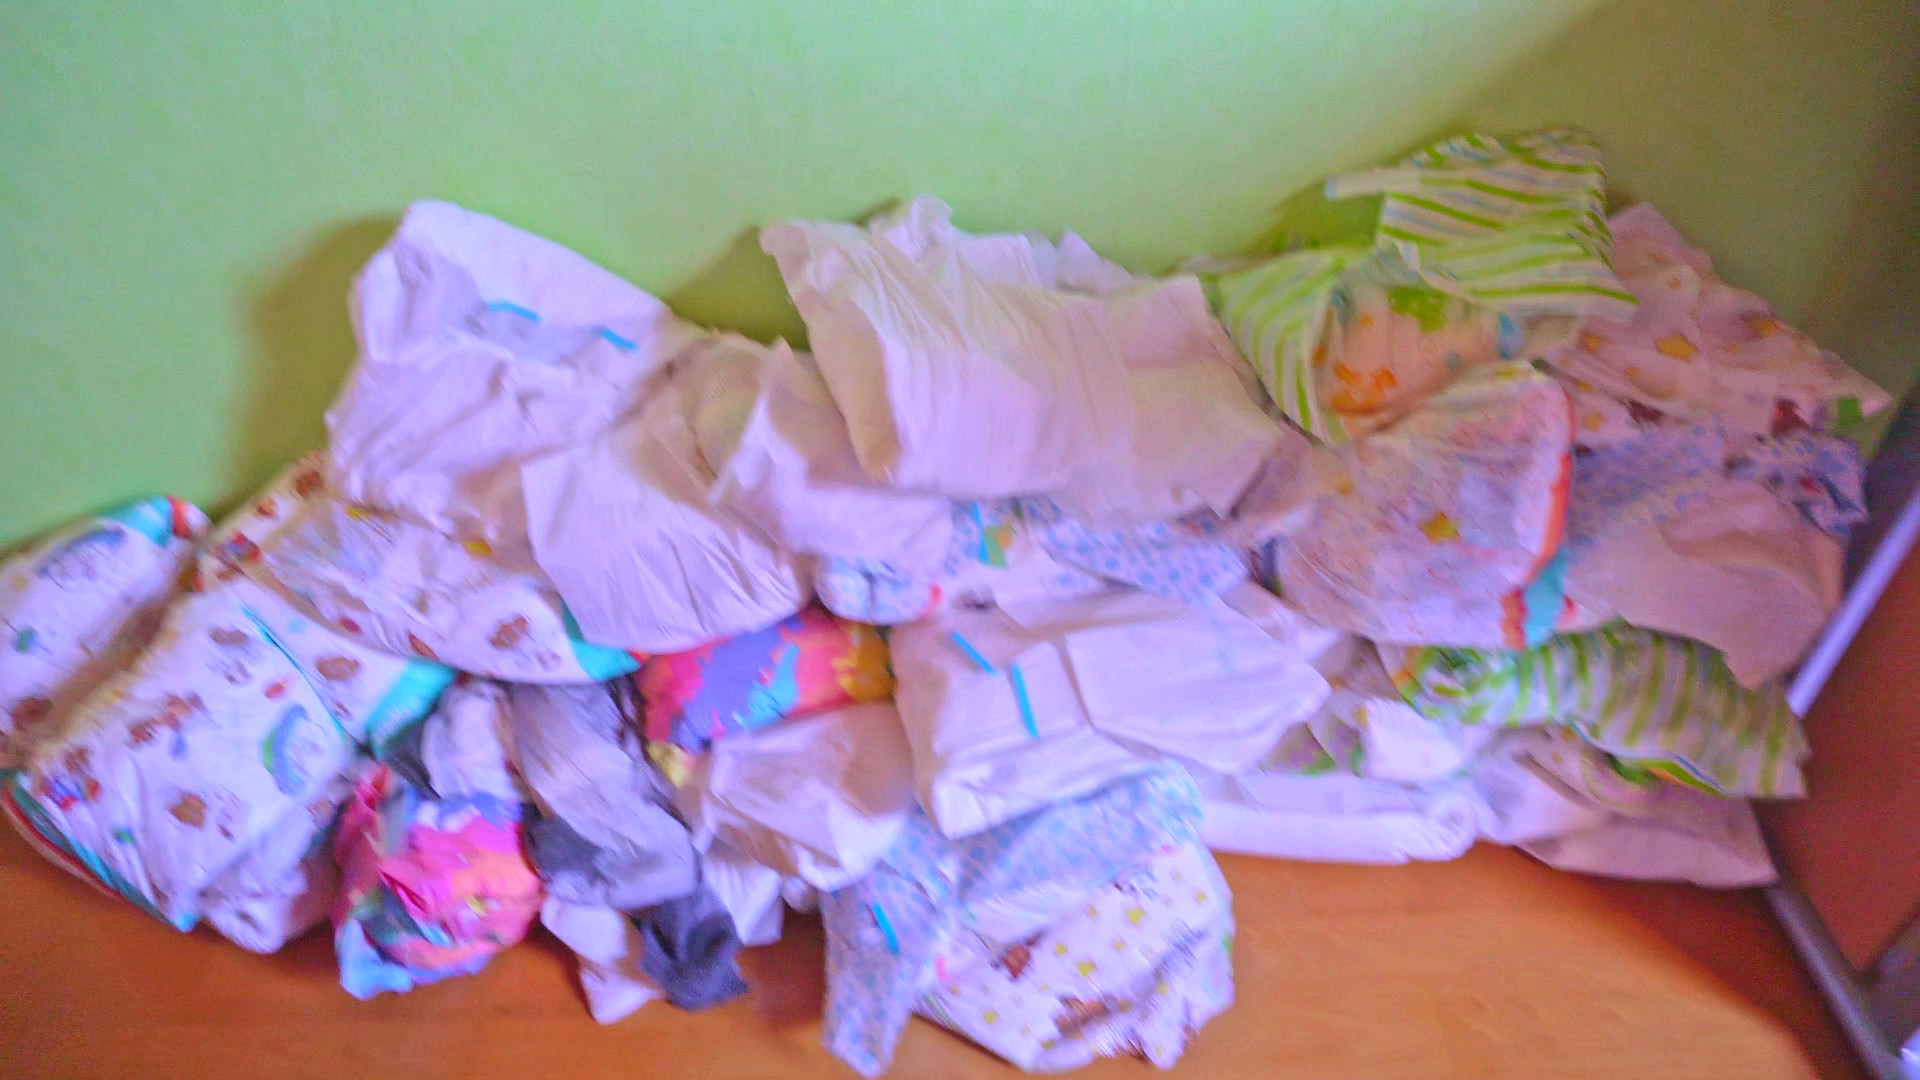 Big stack of wet/messy ABDL diapers, pants, ...